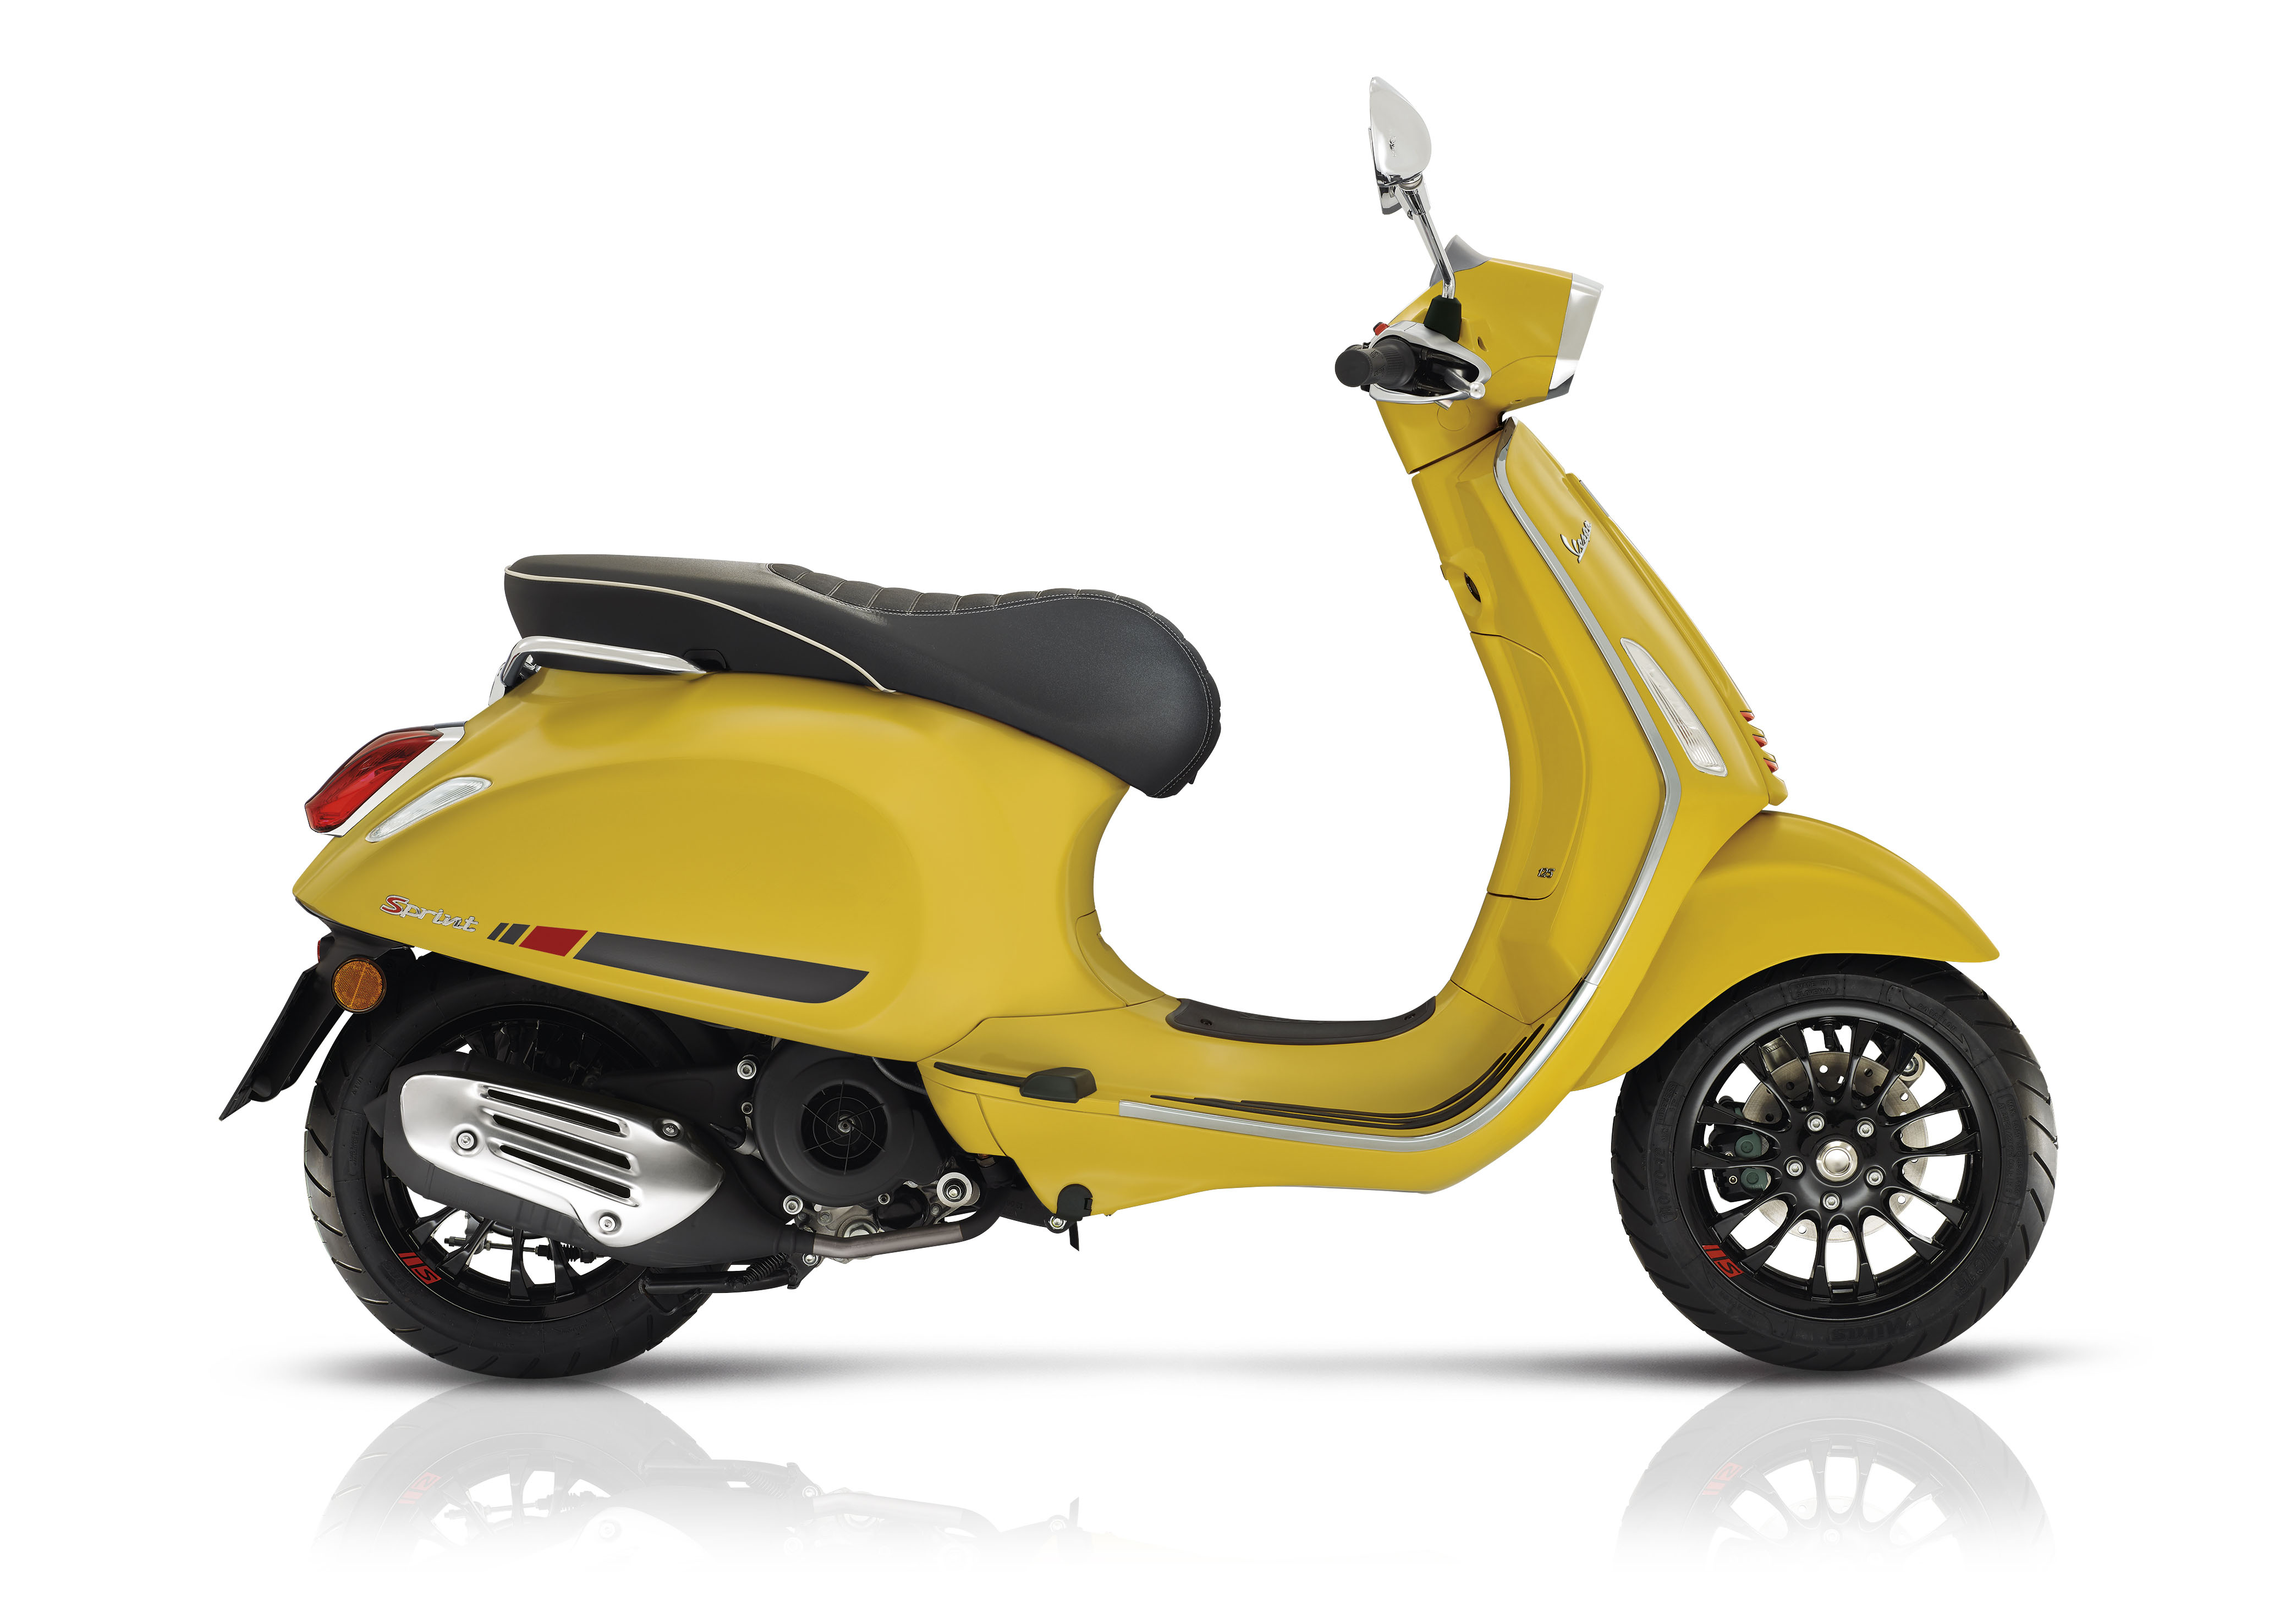 2018 Vespa Sprint S 150 Scooters Southampton New York | Stock Number: N/A